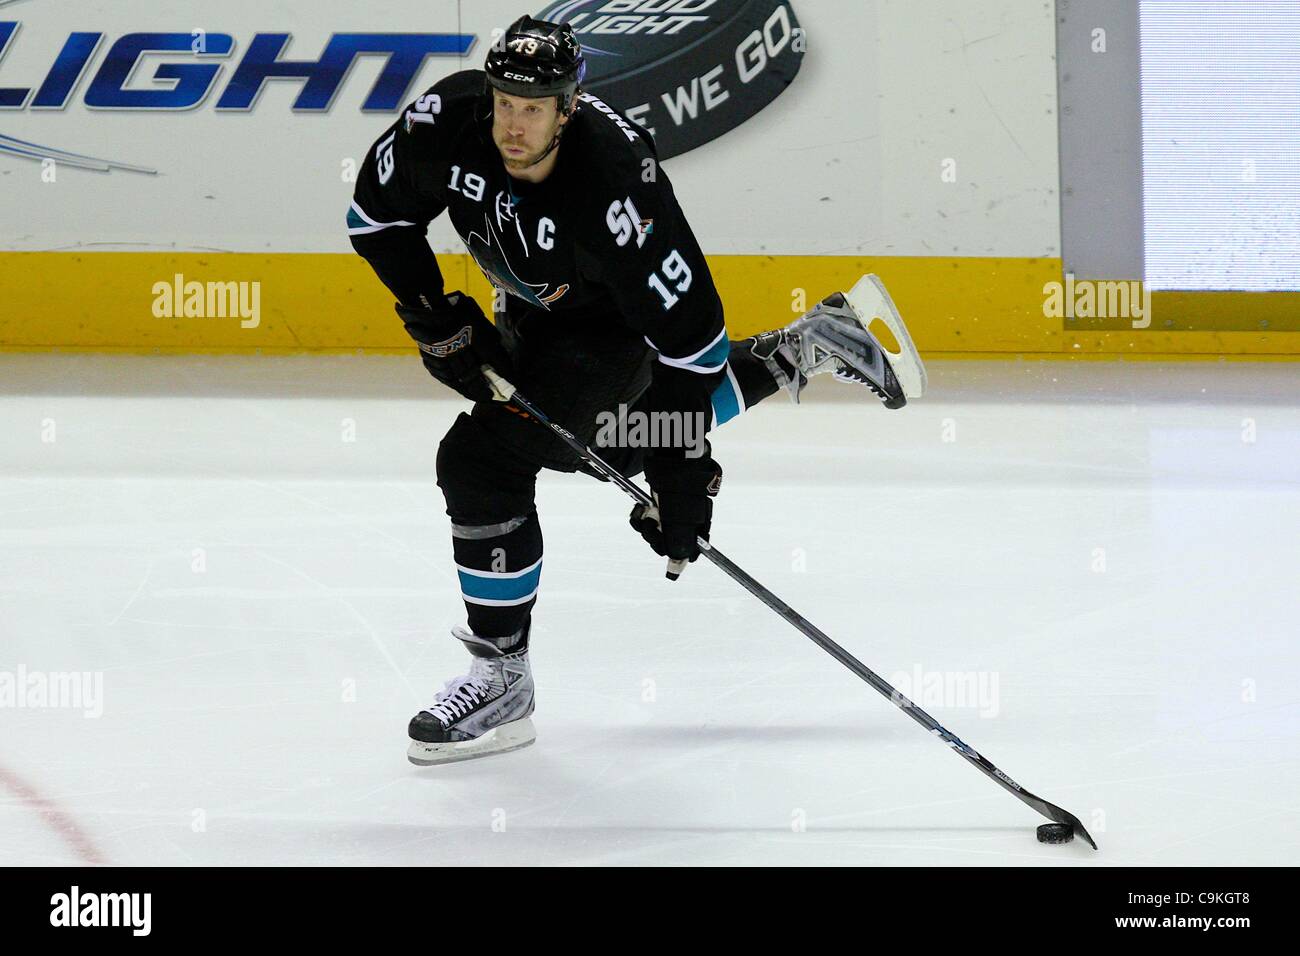 Complete Hockey News on X: San Jose Sharks forward Joe Thornton is back  skating in Switzerland with HC Davos. Thornton played with Davos during the  2005 and 2012 lockouts, winning the Swiss